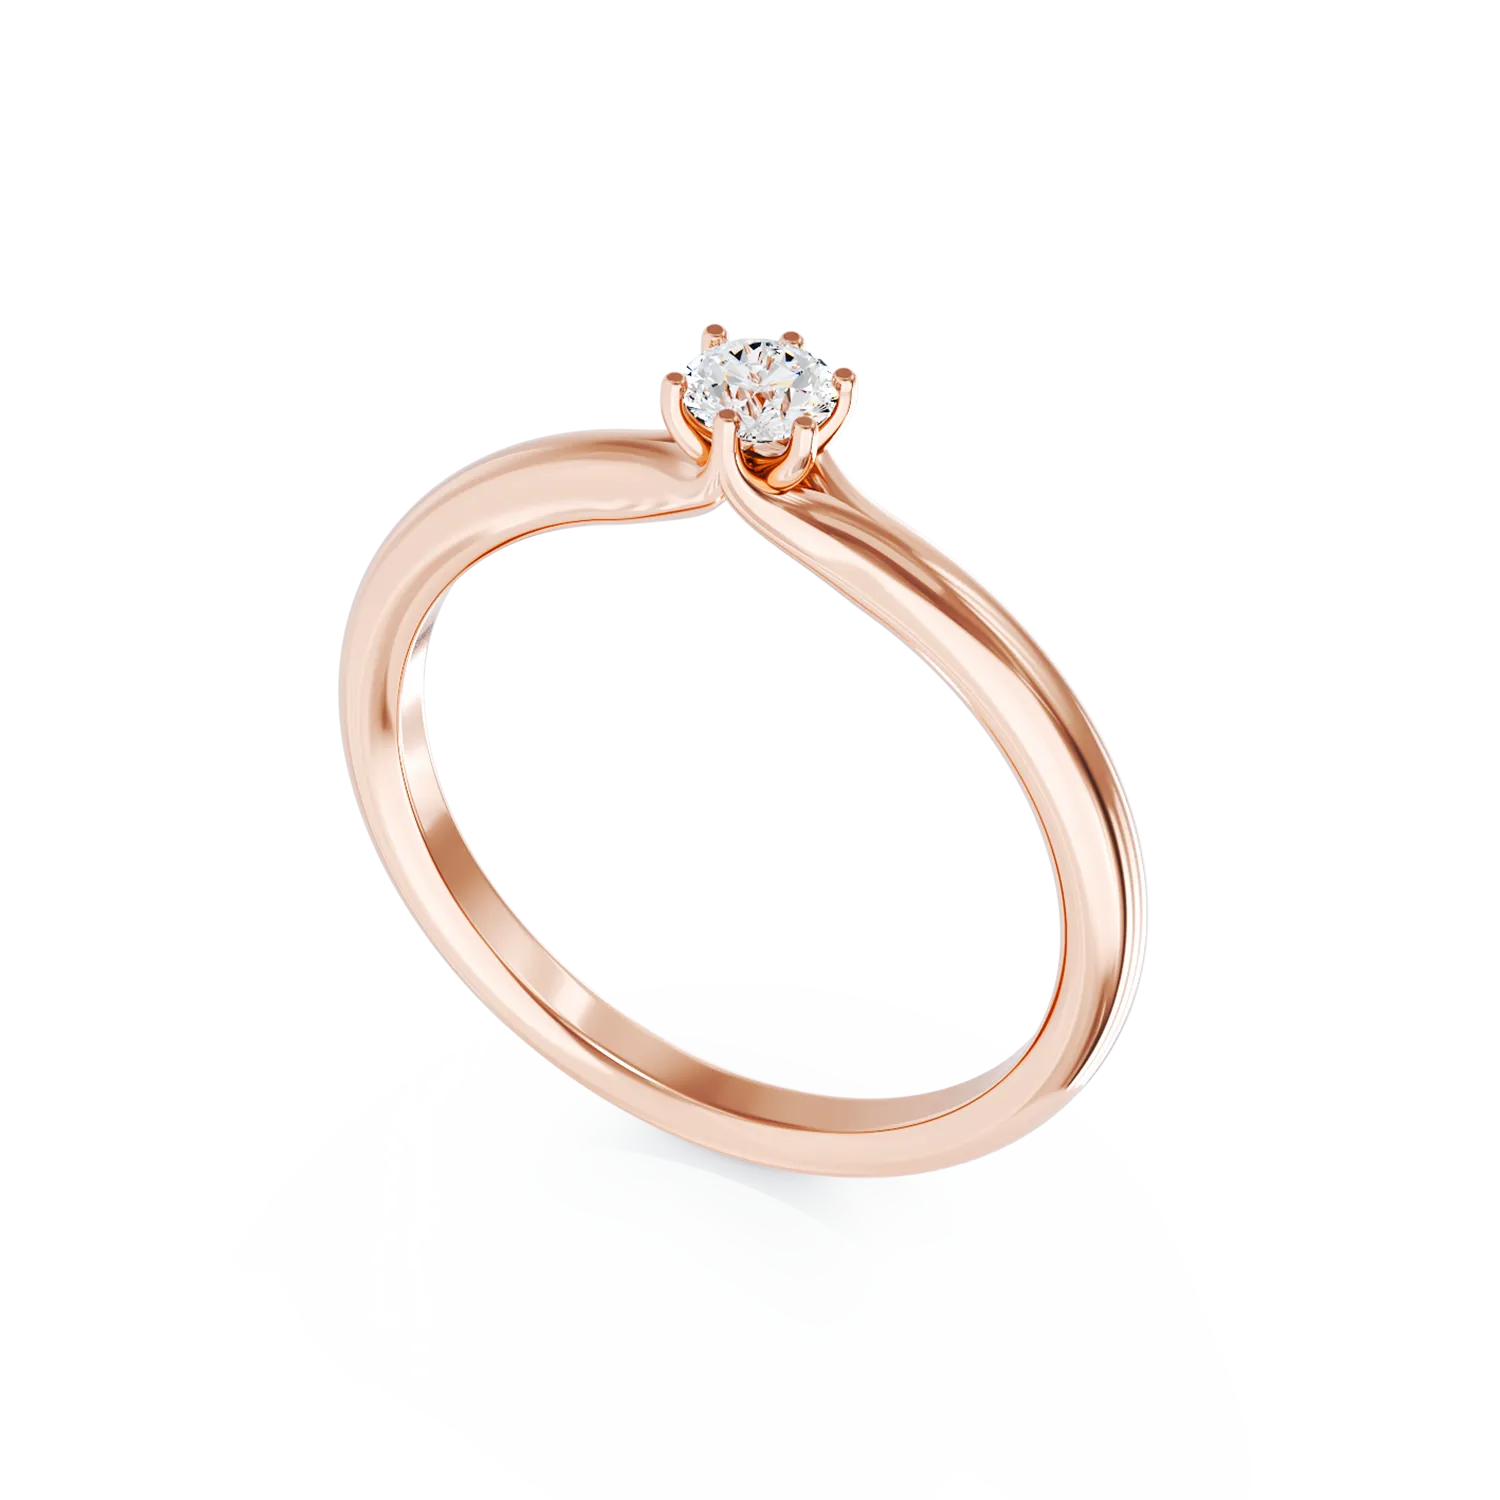 Rose gold engagement ring with 0.163ct solitaire diamond